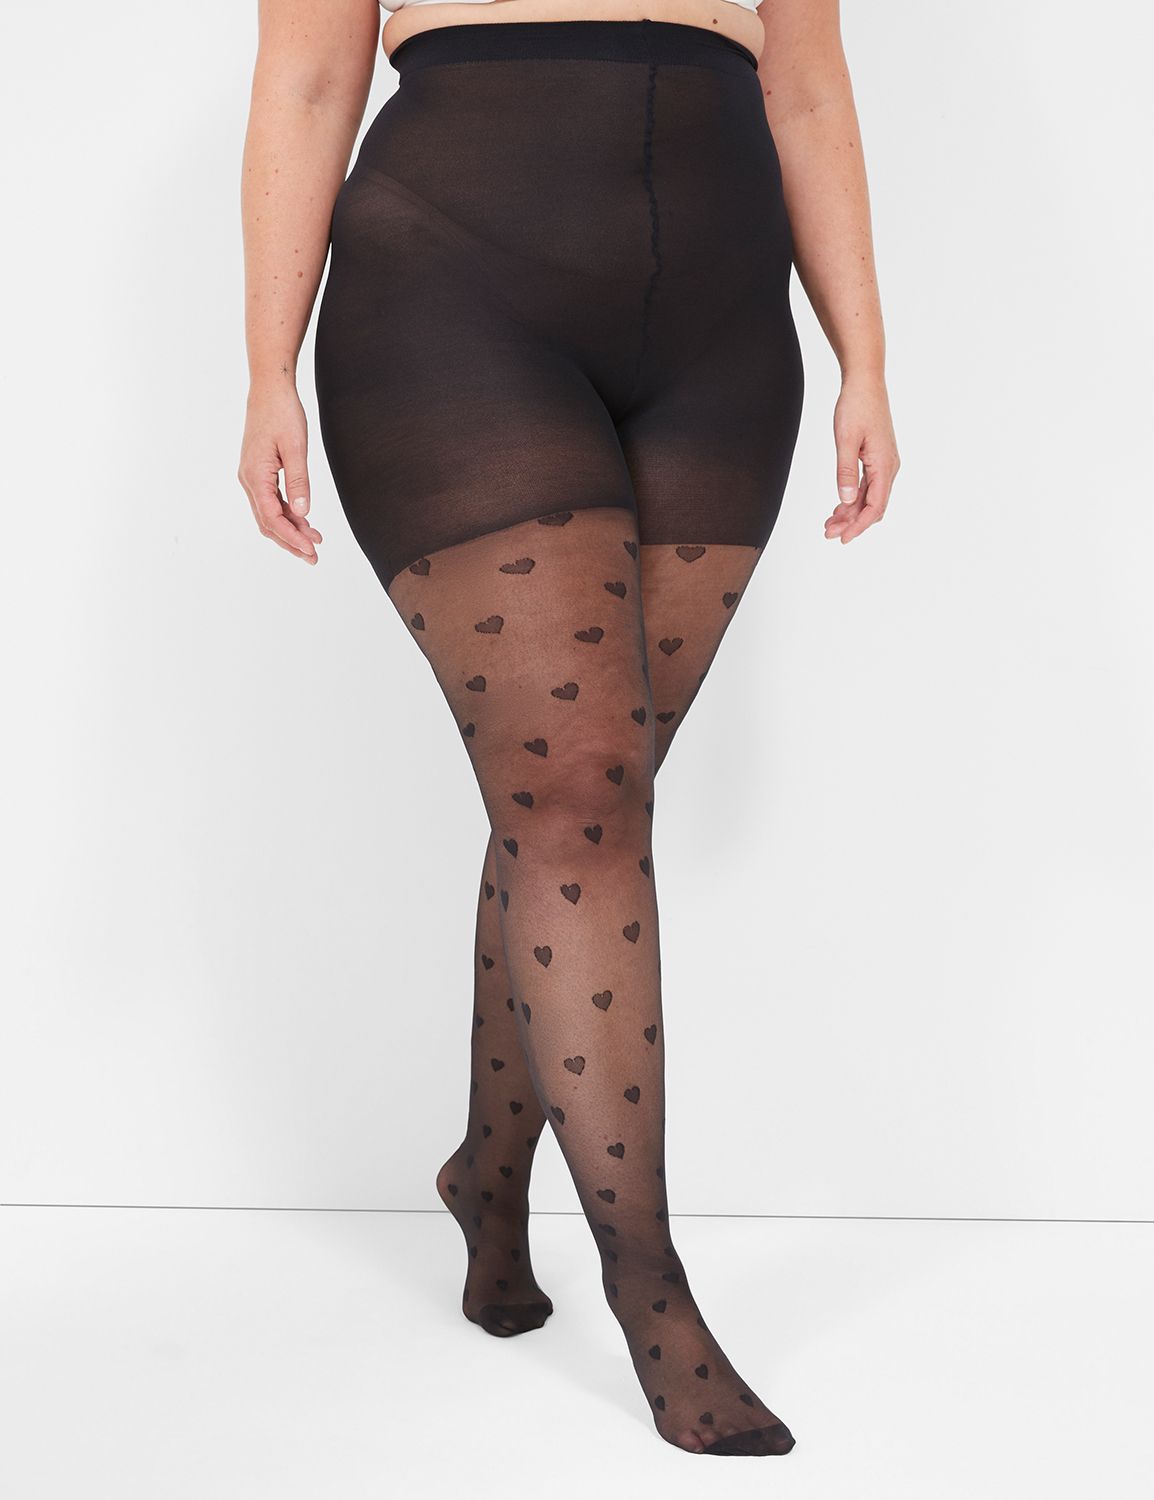 Line Of Heart Print Tights Body Color & Black